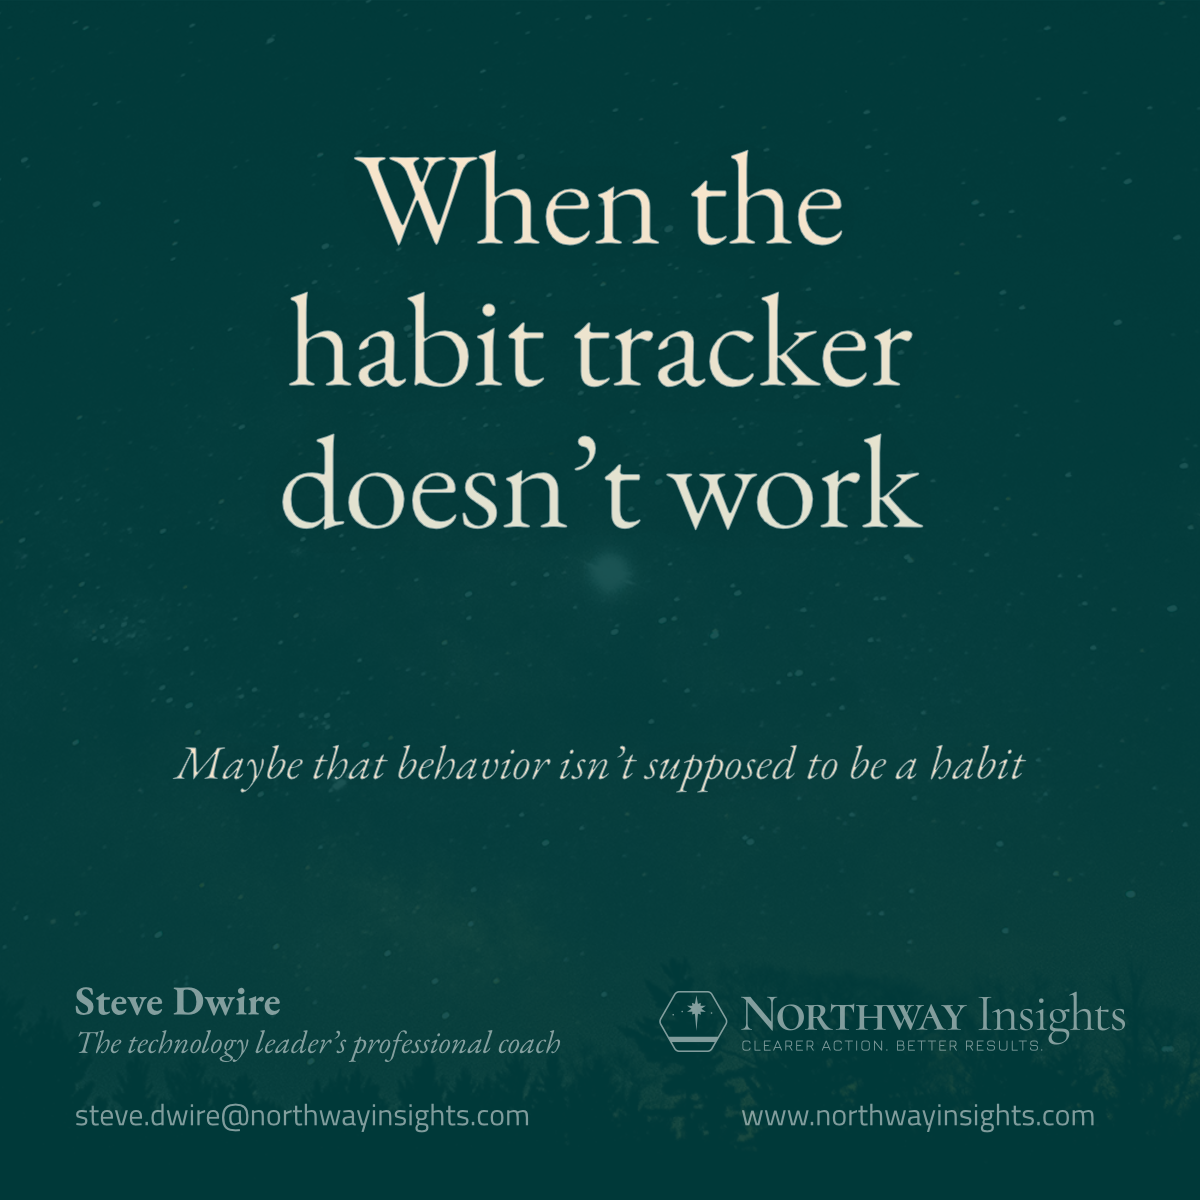 When the habit tracker doesn't work (Maybe that behavior isn't supposed to be a habit.)